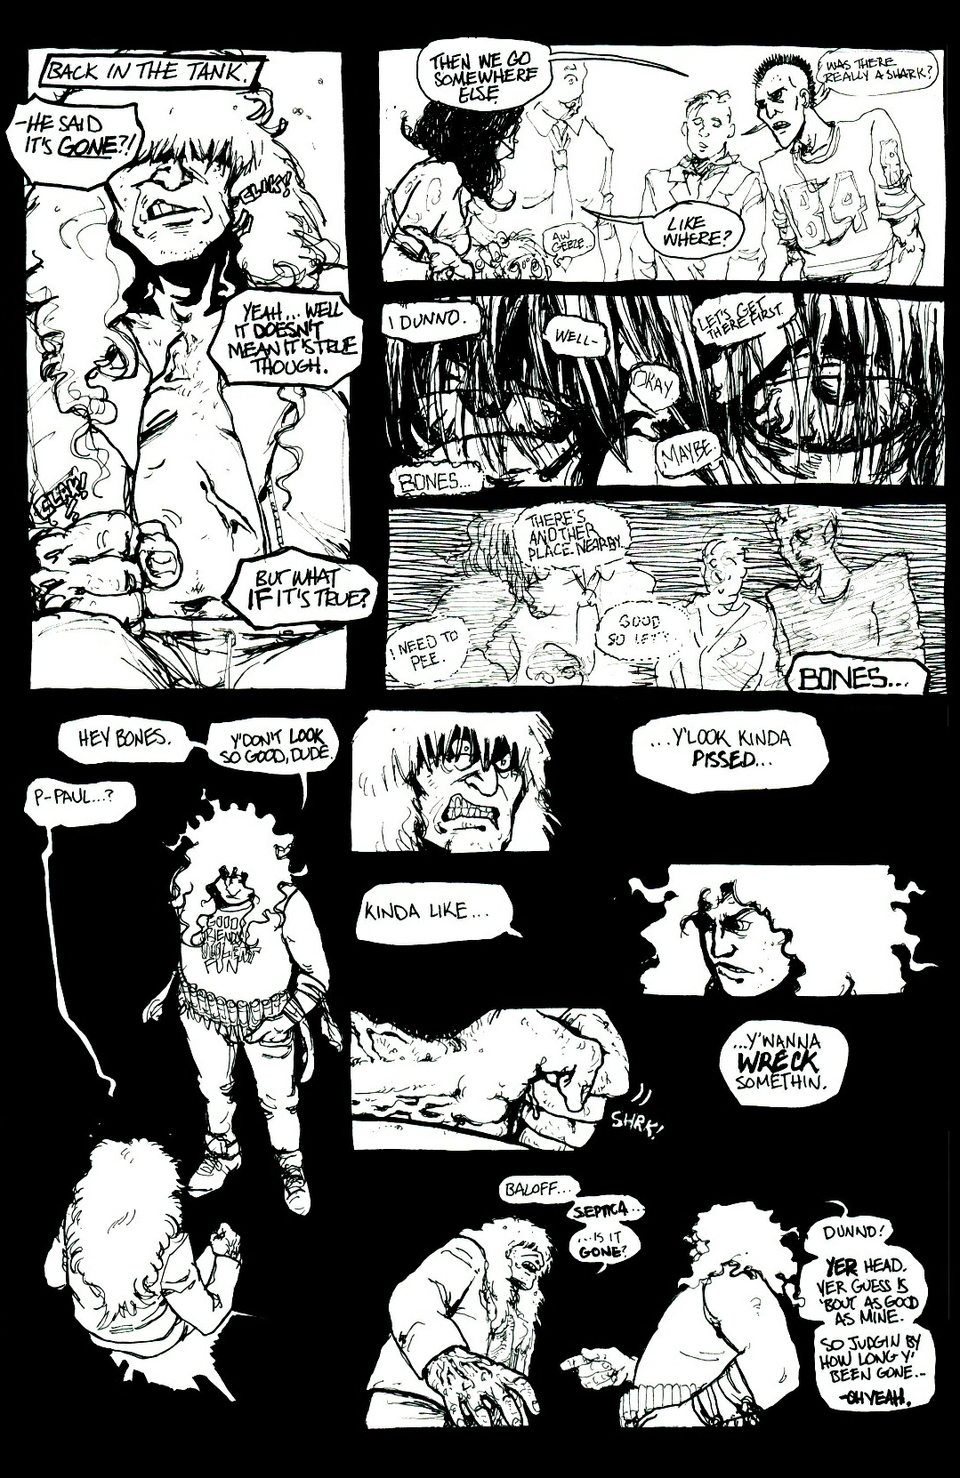 PUTRID MEAT PAGE 192